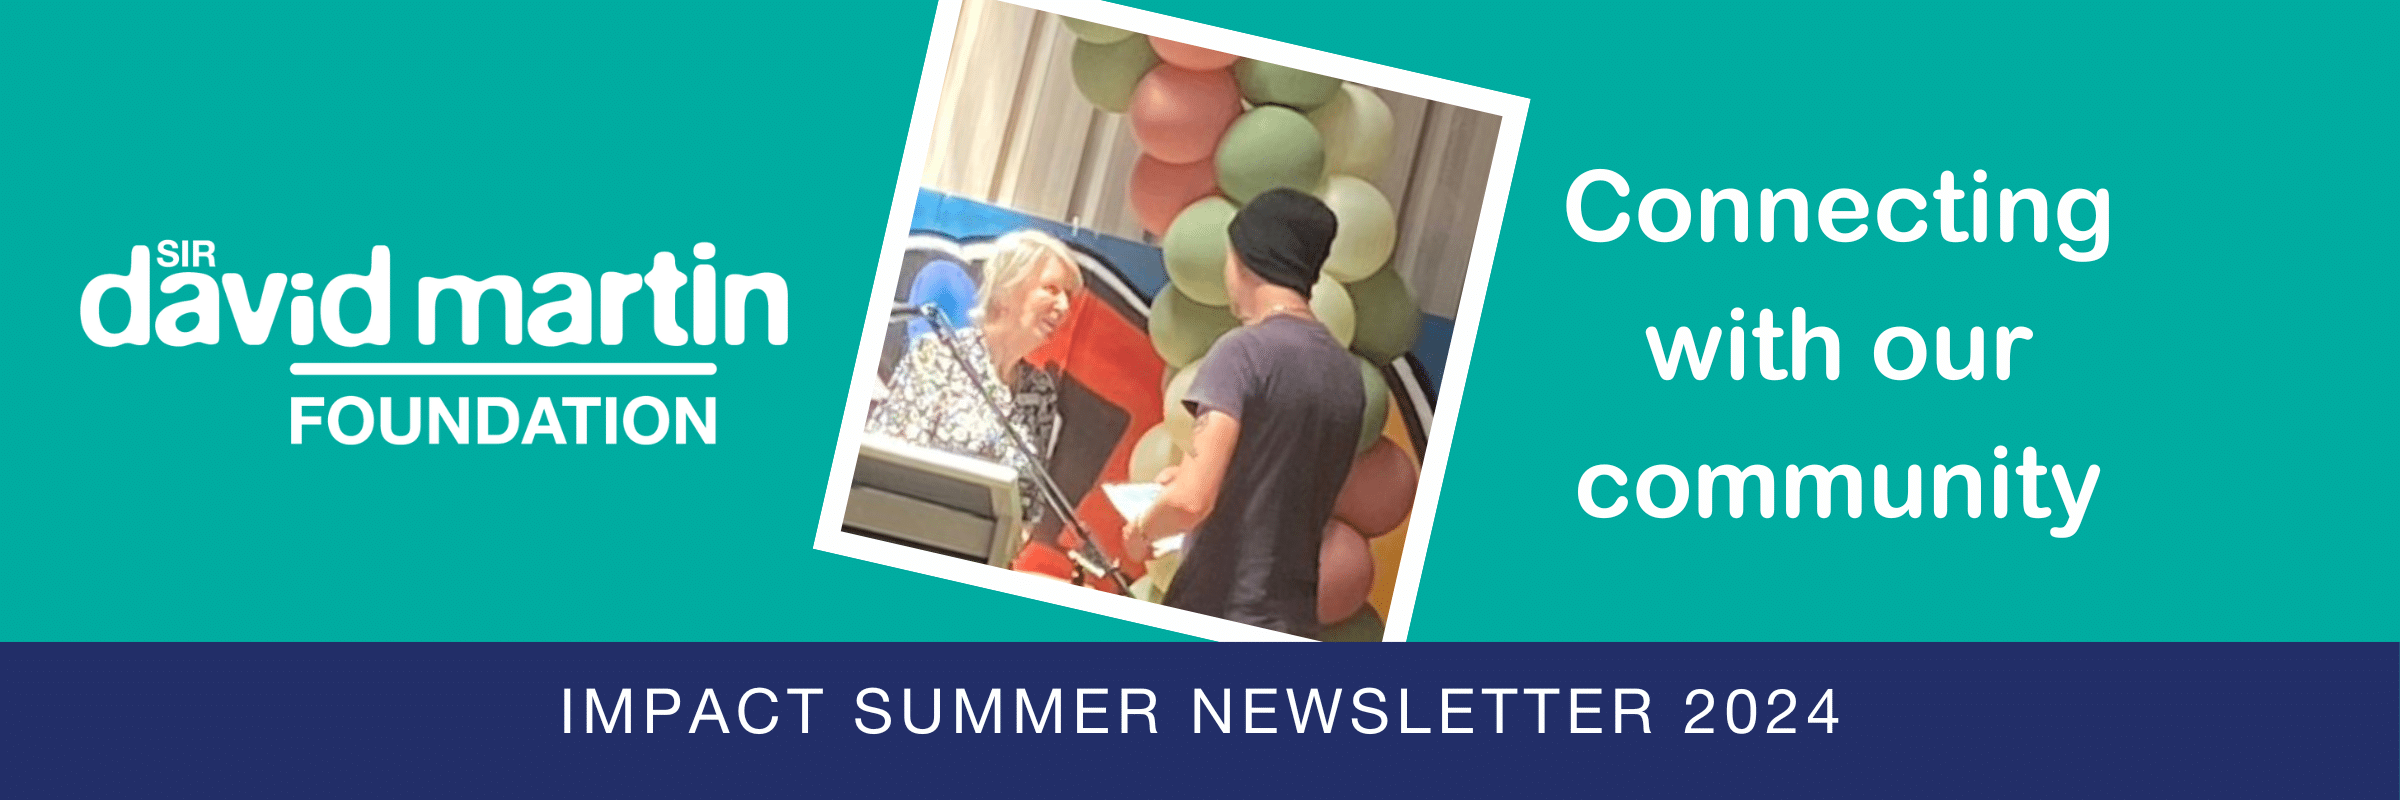 Impact Summer newsletter 2024: Connecting with our community